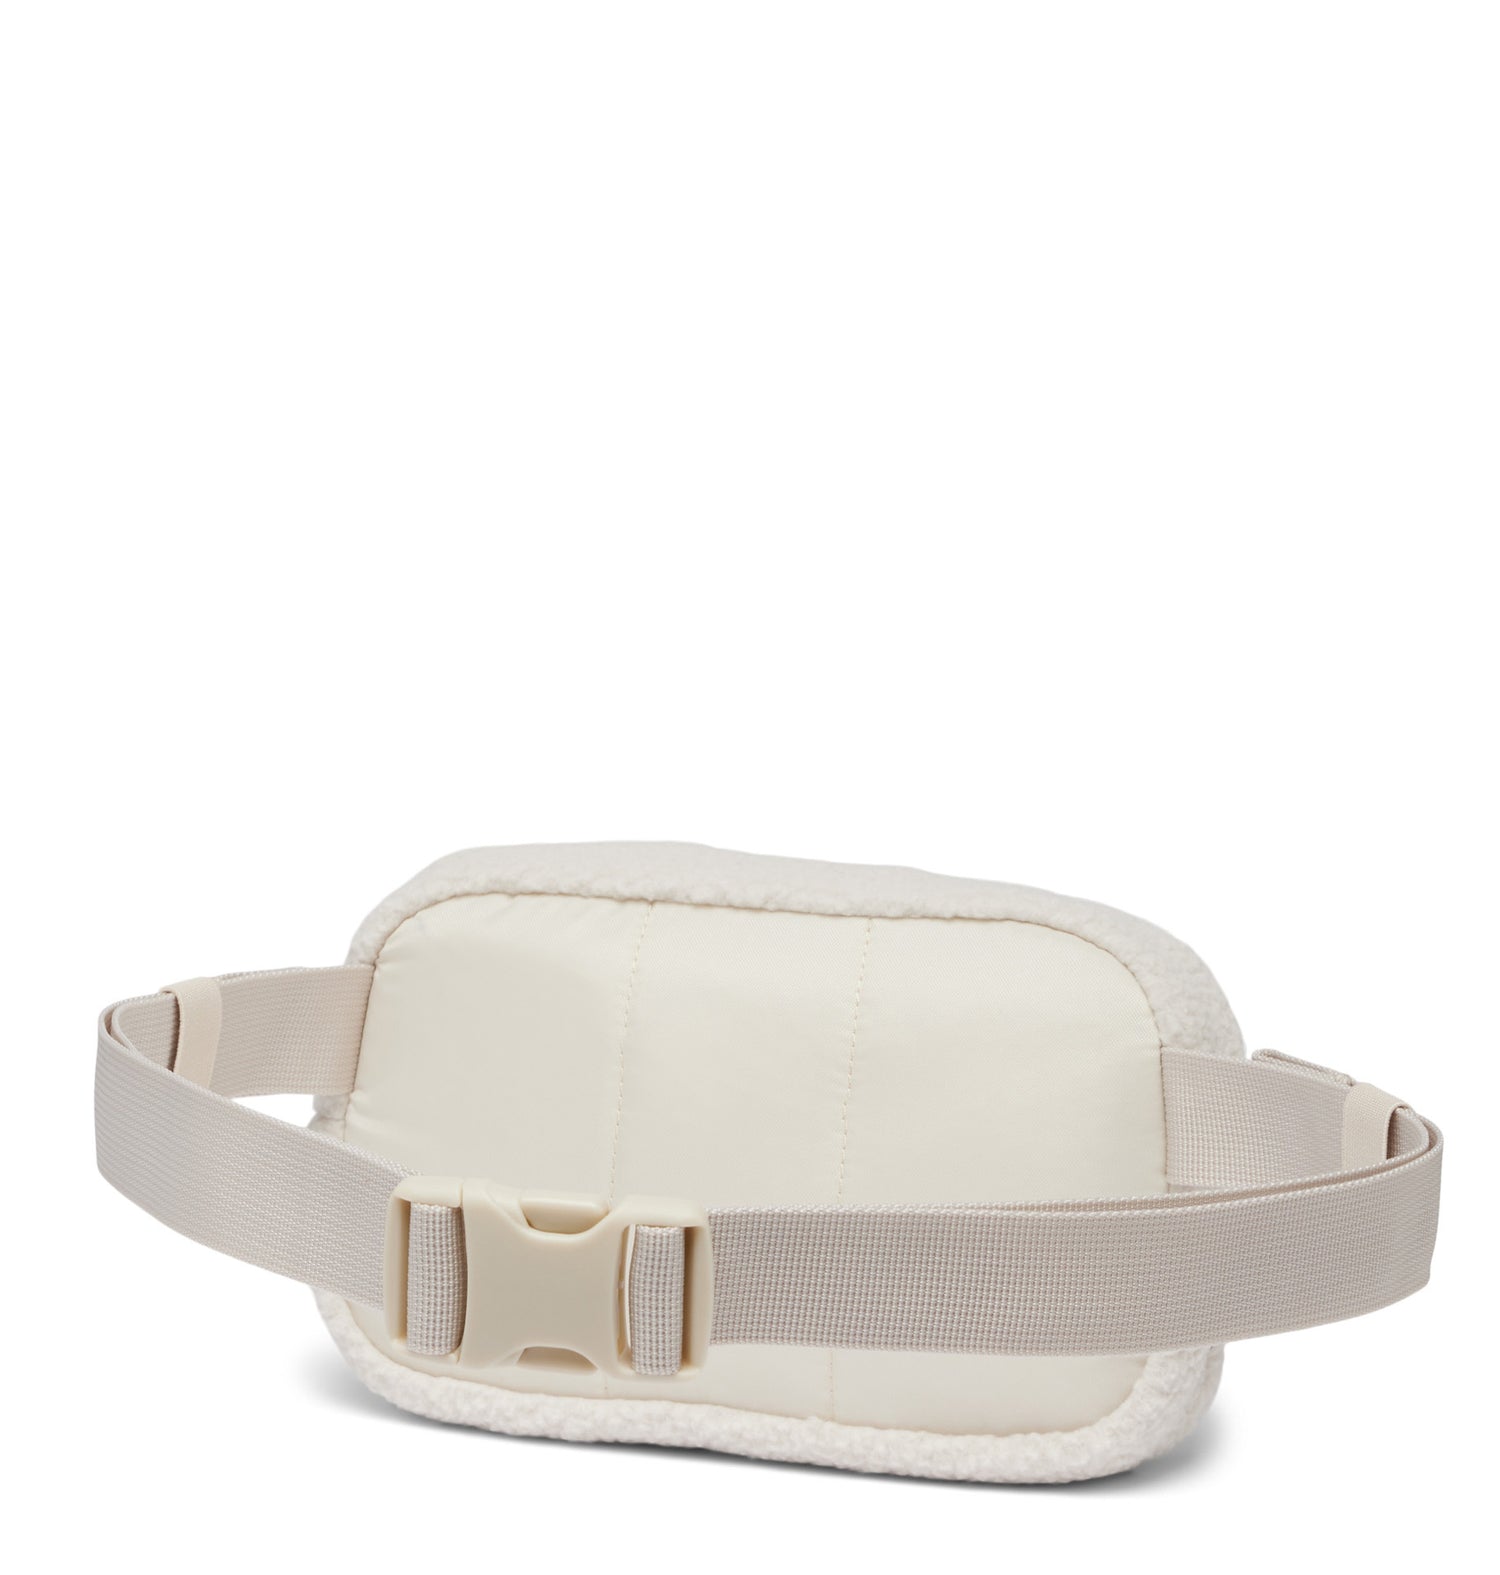 Back side view of a white fanny pack called Helvetia designed by Columbia showing its belt strap clip and back panel.